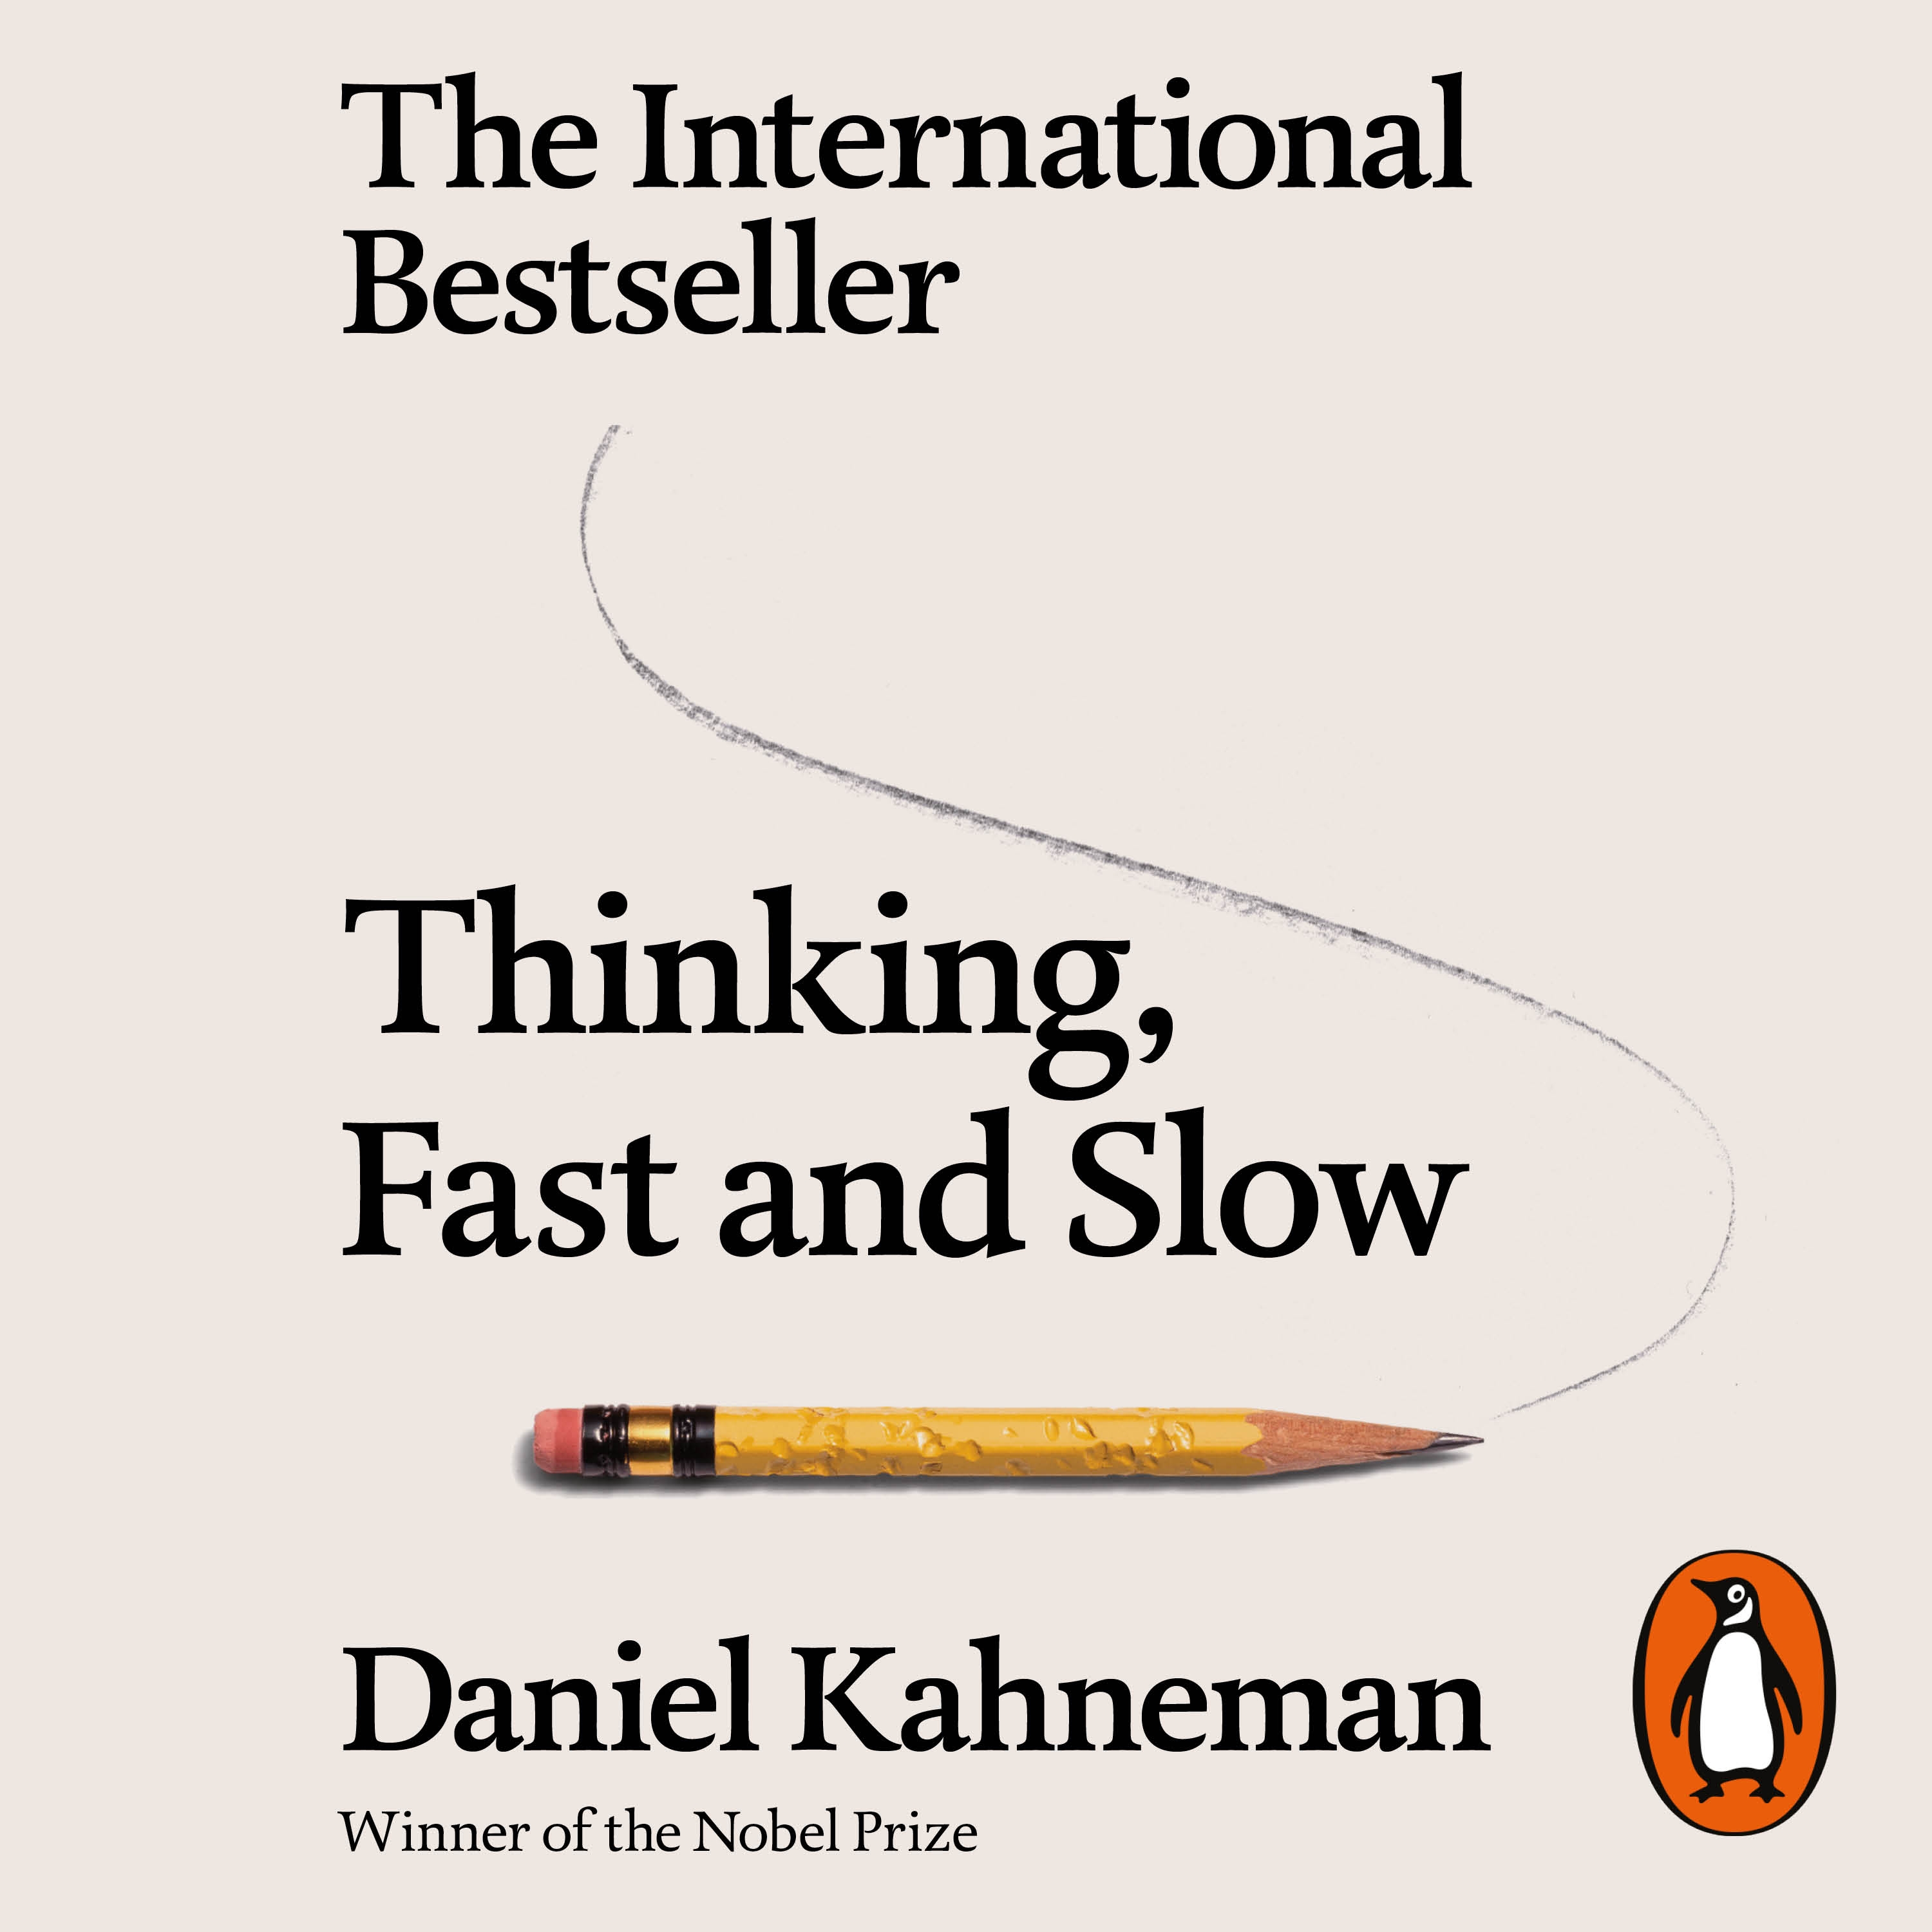 Audiobook image for Thinking Fast and Slow: cream background with a pencil line swooping across the image, and the pencil lying horizontally at the bottom. "The international bestseller" is at the top, the title in the middle, and author name at the bottom.